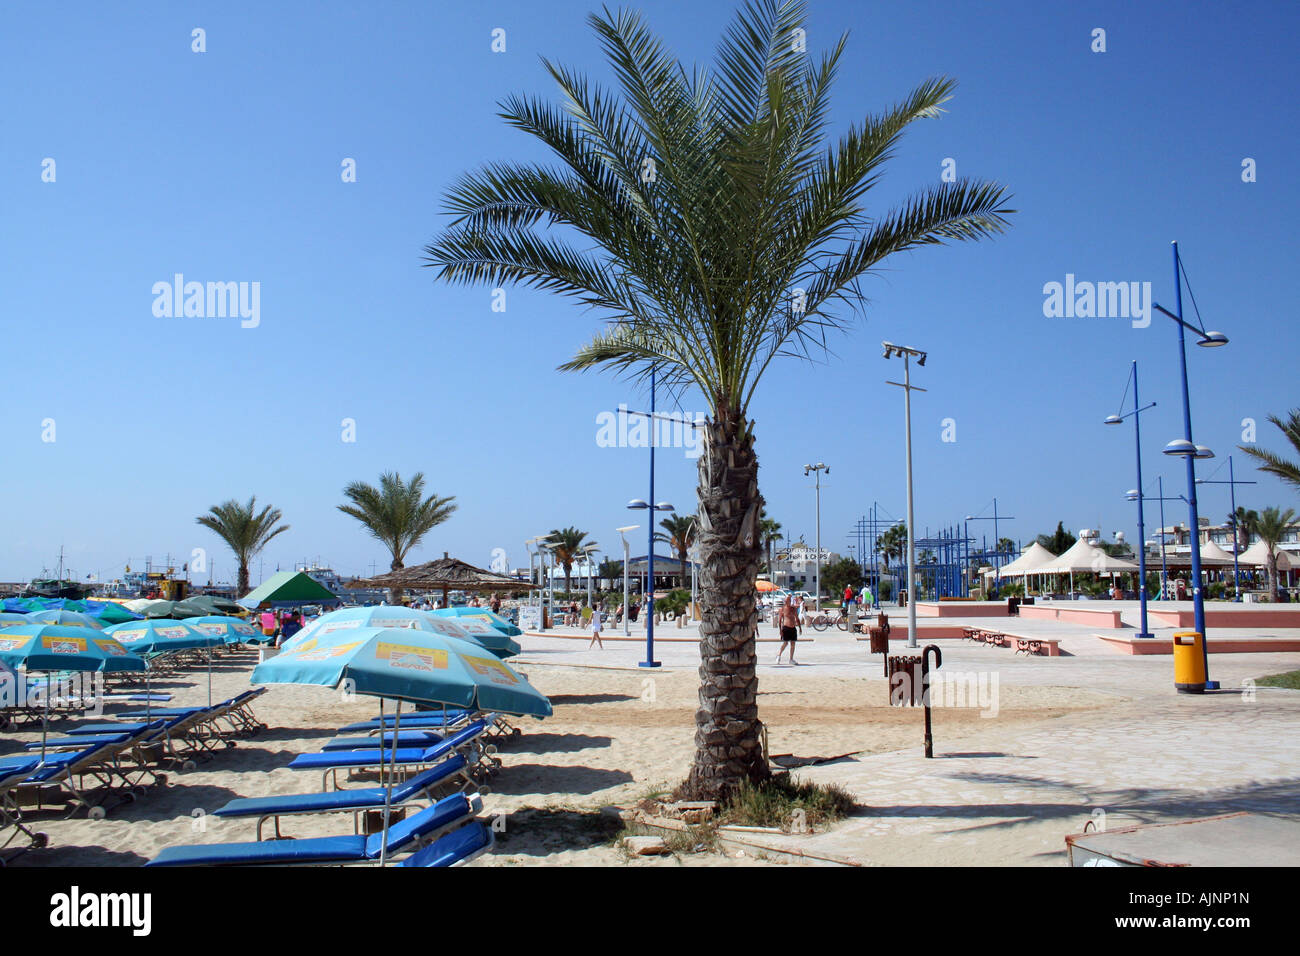 Ayia Napa habour in tourist resort on island of Cyprus. You can see the palm tree lined promenade Stock Photo